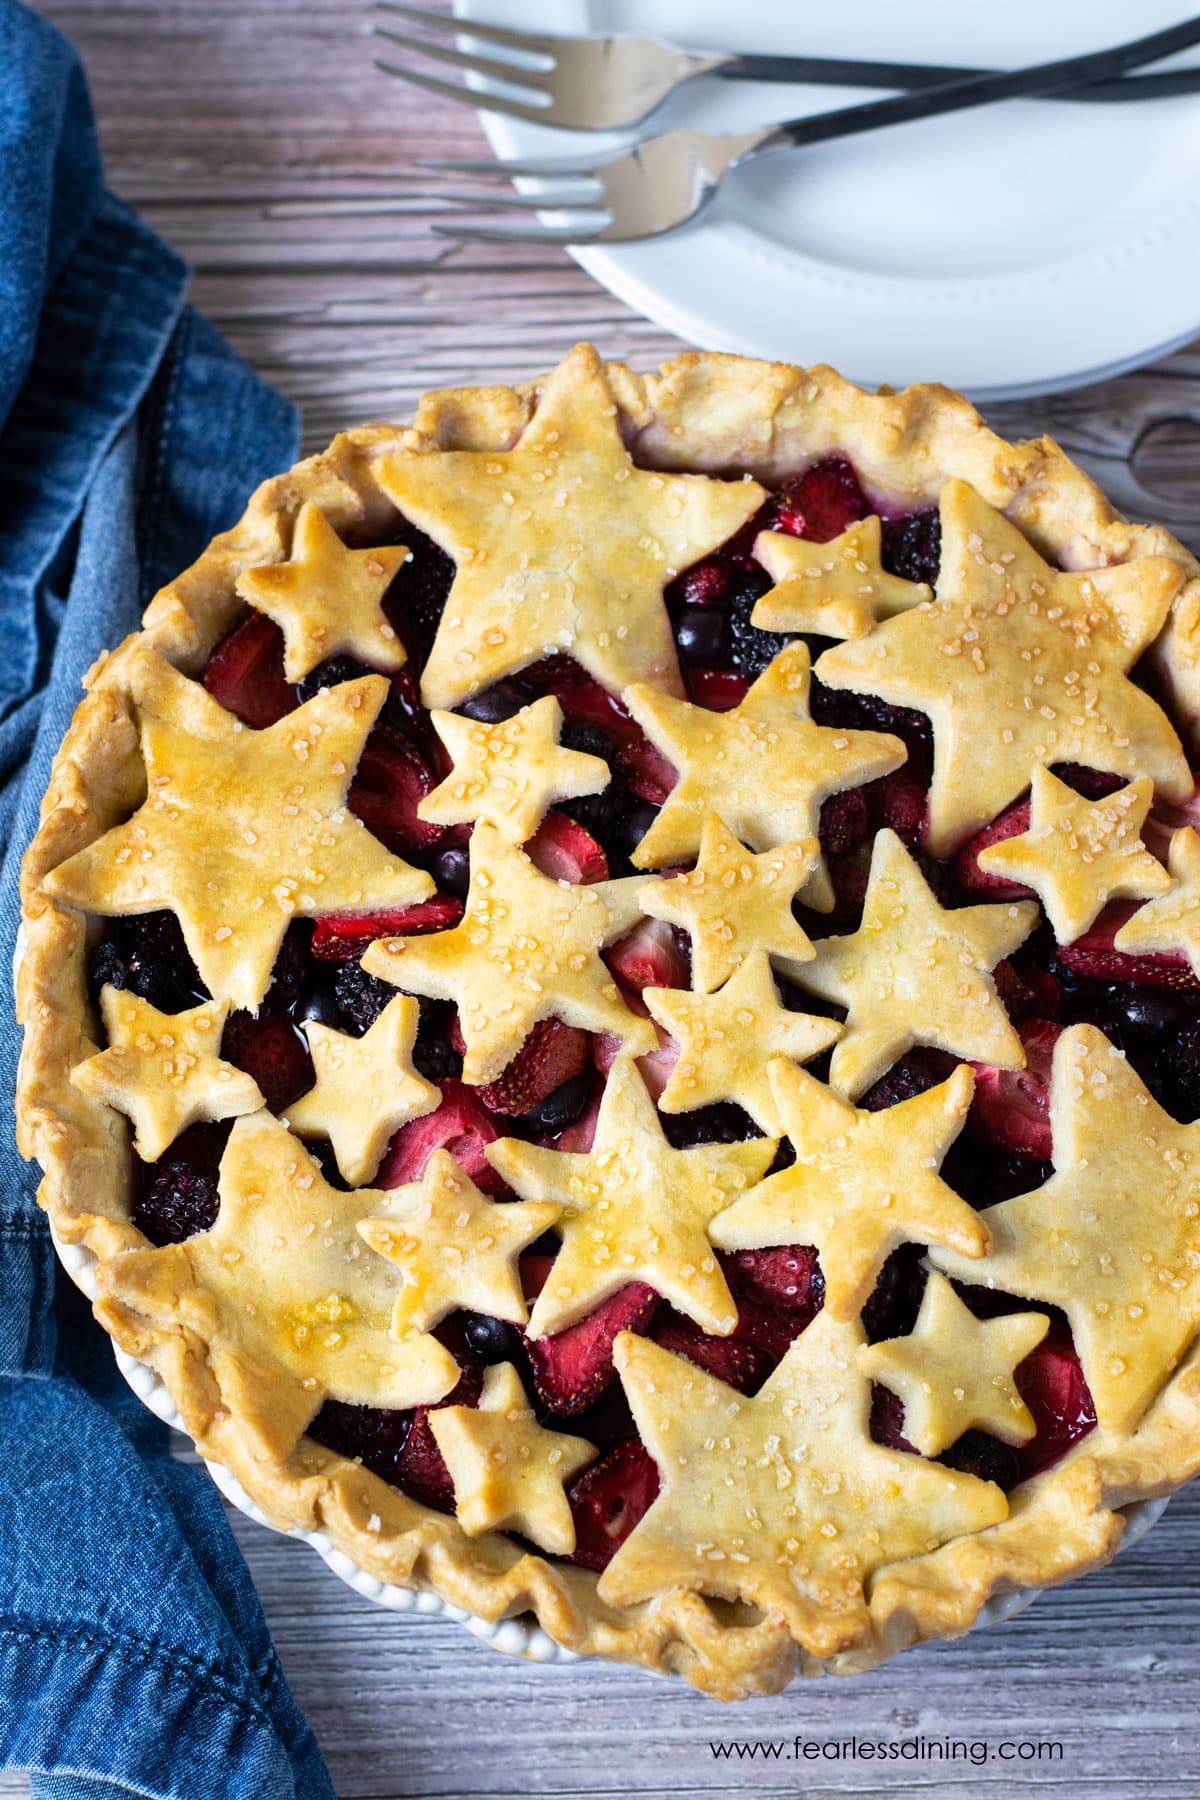 The top view looking down at a mixed berry pie. The top crust is cut into star shapes.